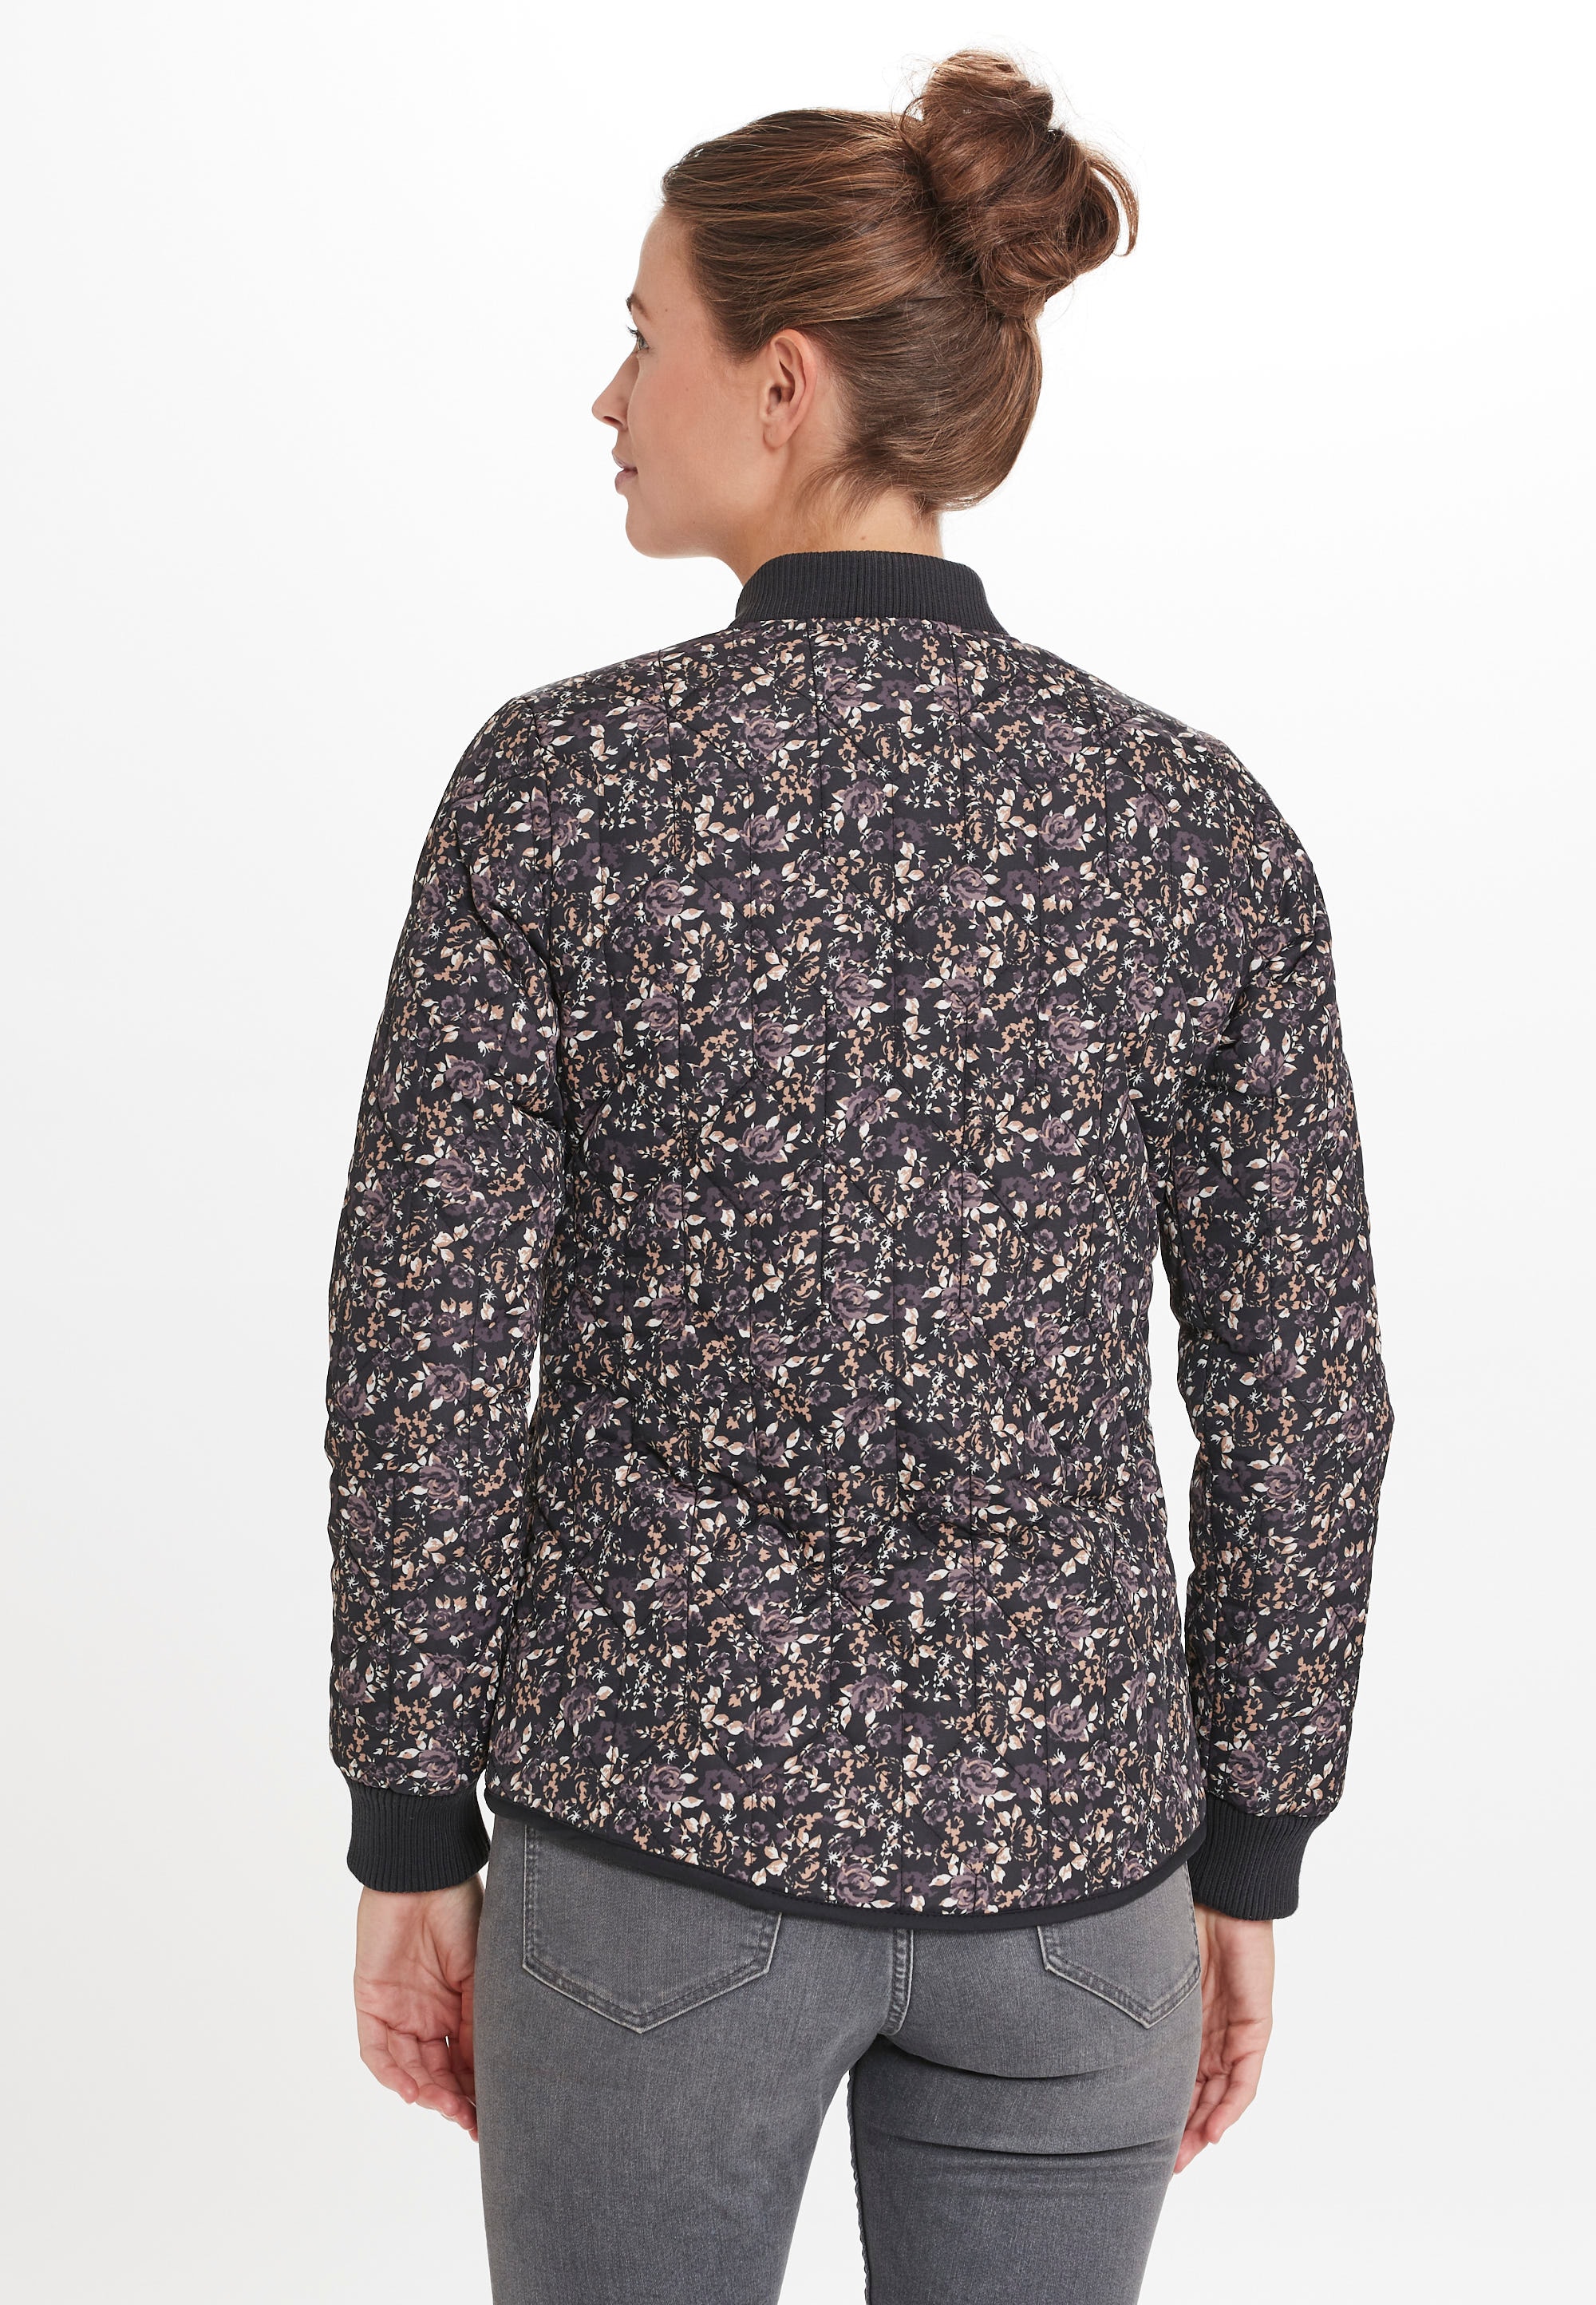 WEATHER REPORT Outdoorjacke »Floral«, mit floralem Allover-Muster